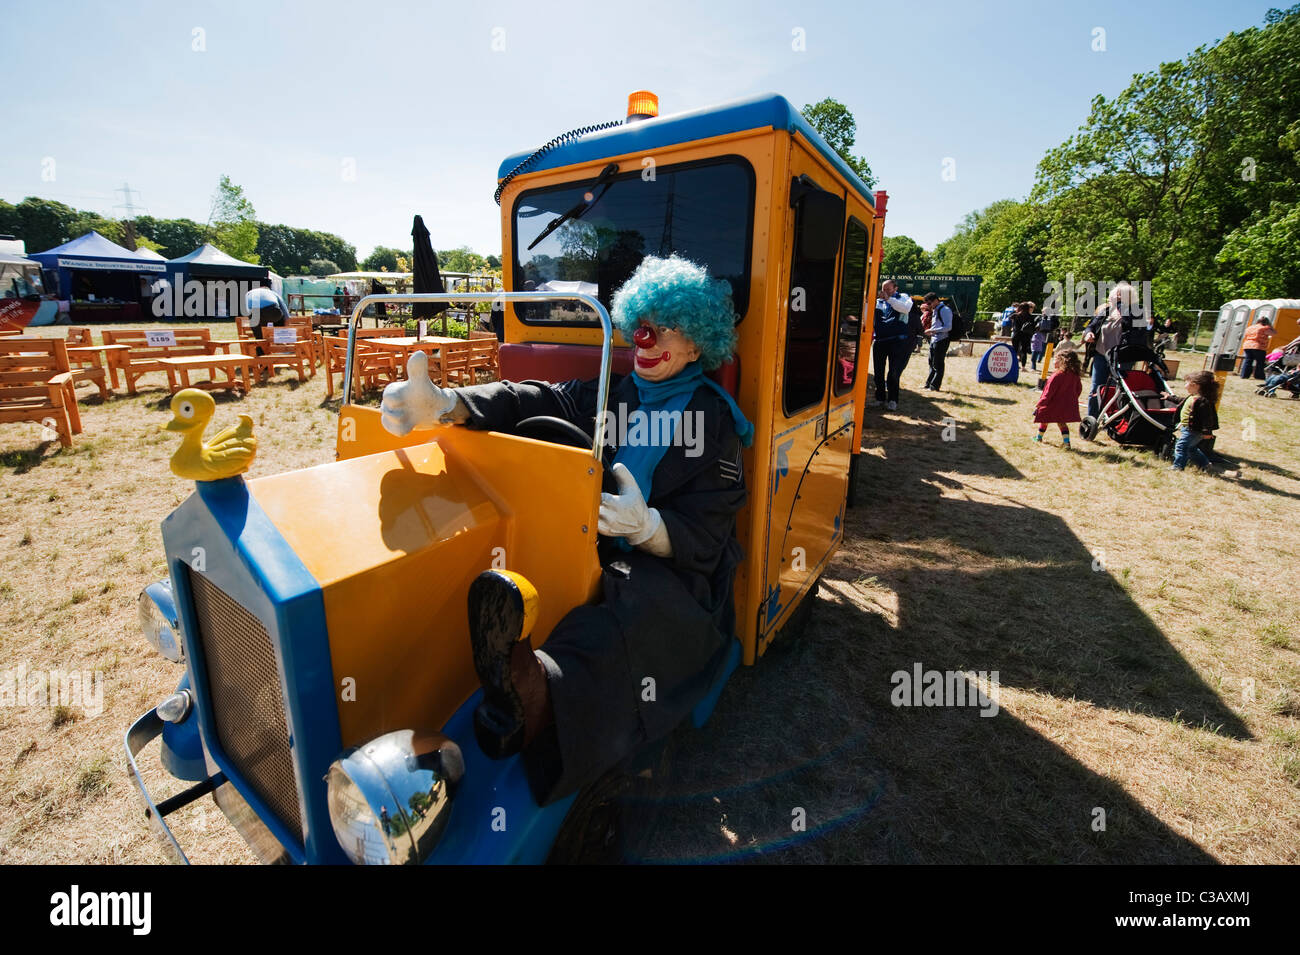 Childrens train ride at the Morden Hall Craft and Country Show in southwest London. Stock Photo